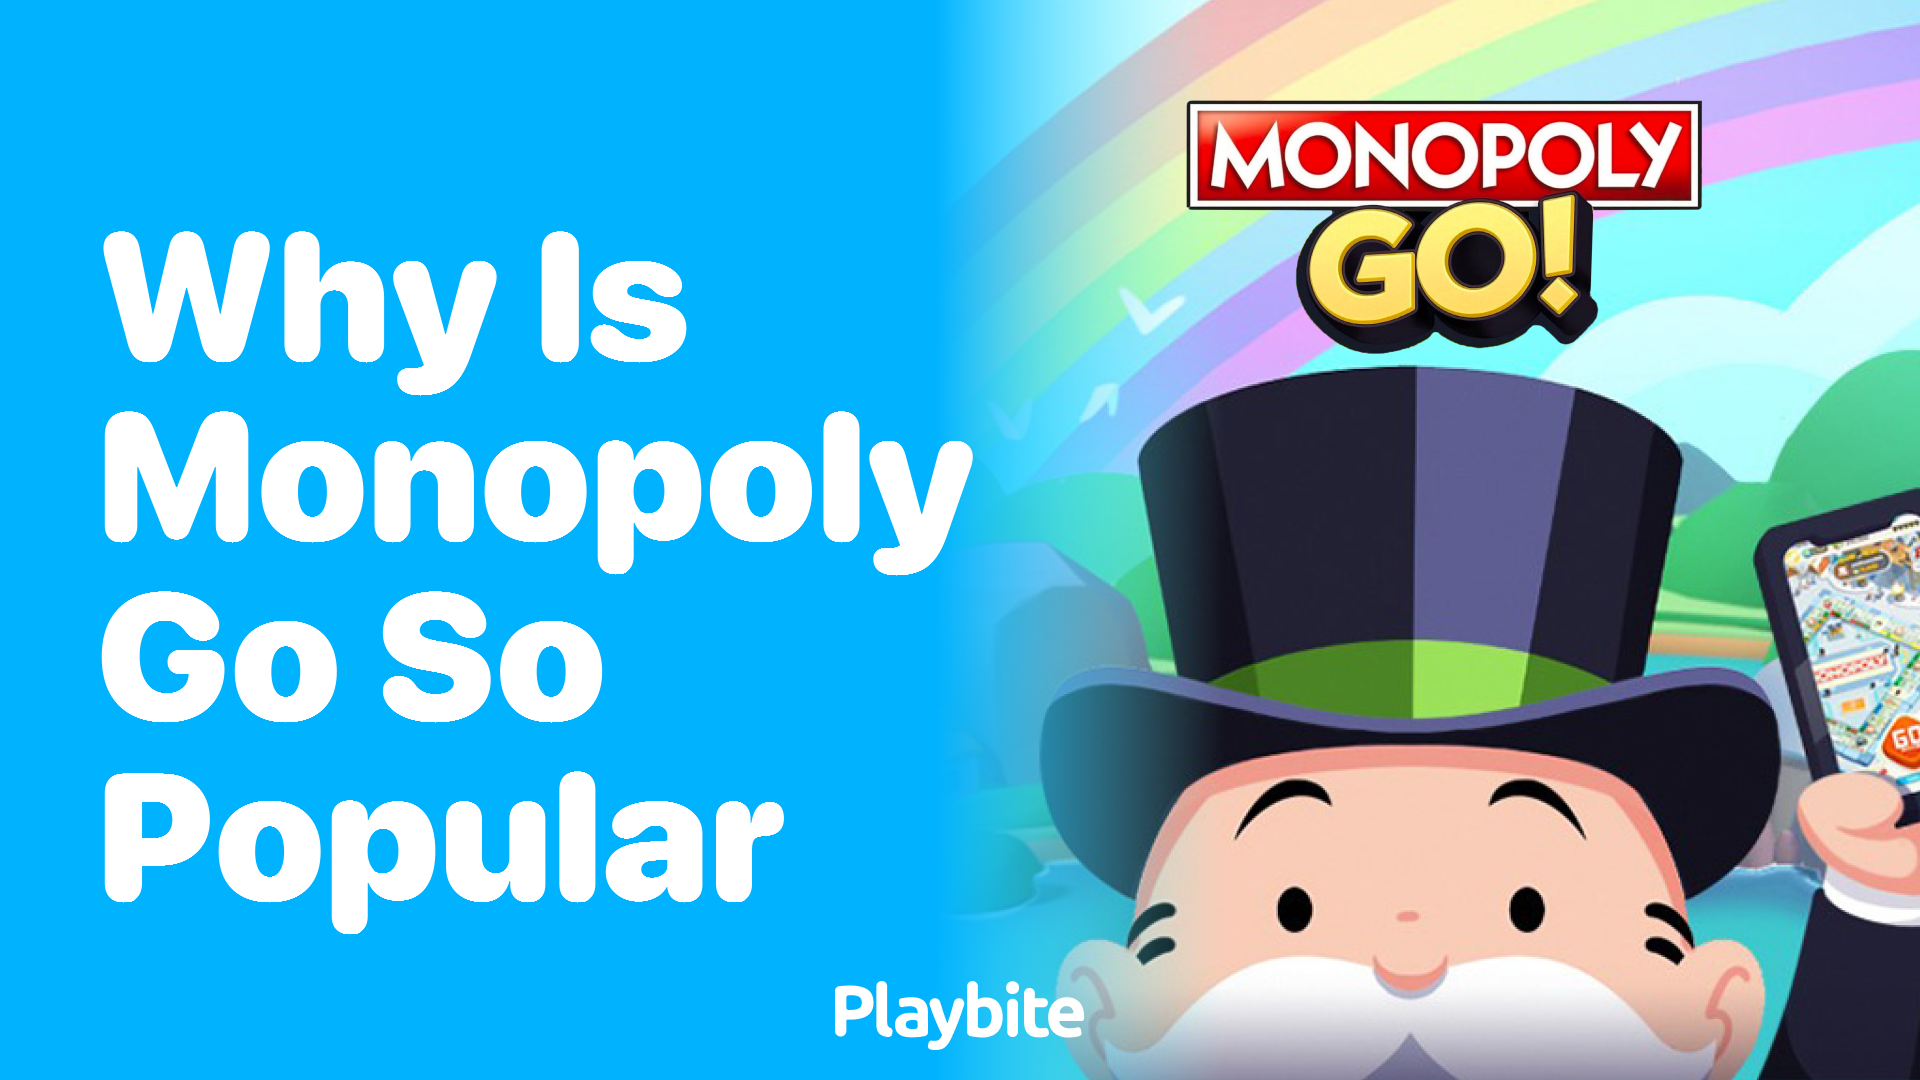 Why Is Monopoly Go So Popular?